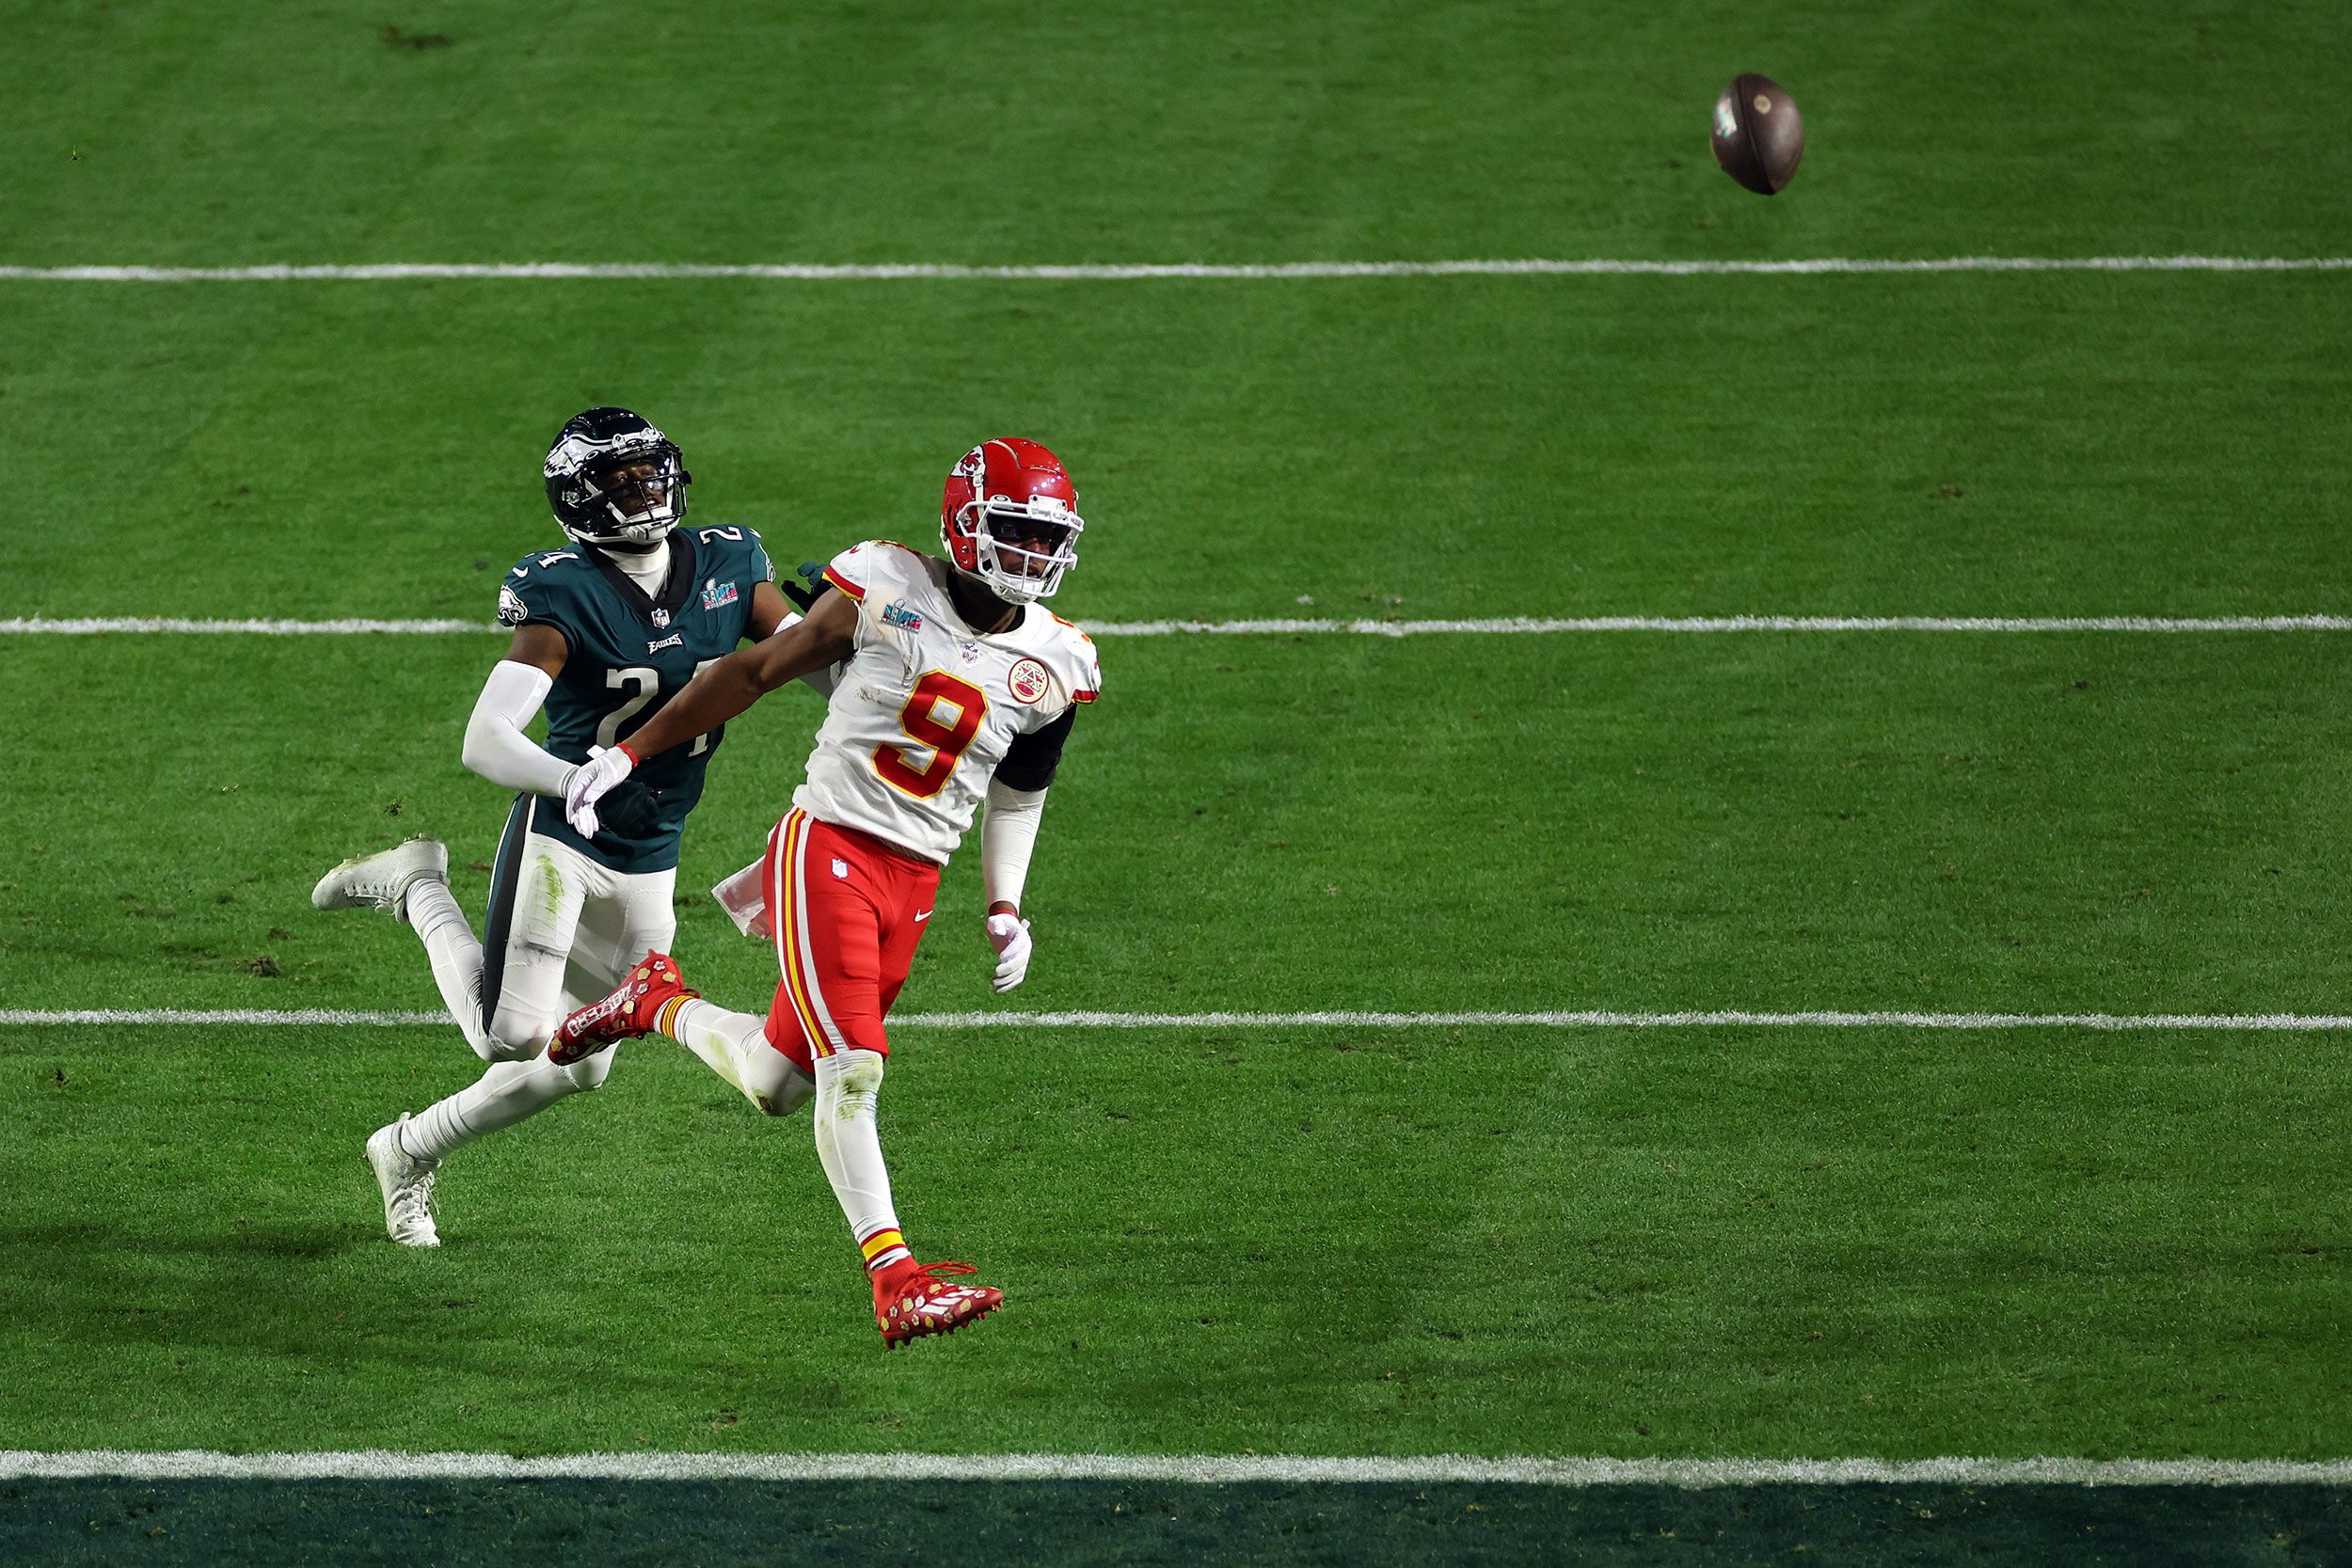 A pass soars over the head of Kansas City wide receiver JuJu Smith-Schuster late in the fourth quarter of the Super Bowl. Eagles cornerback James Bradberry <a href="index.php?page=&url=https%3A%2F%2Fwww.cnn.com%2F2023%2F02%2F13%2Fsport%2Fholding-call-super-bowl-lvii-chiefs-eagles-spt-intl%2Findex.html" target="_blank">was called for holding</a> on the play, setting up the Chiefs' game-winning field goal.